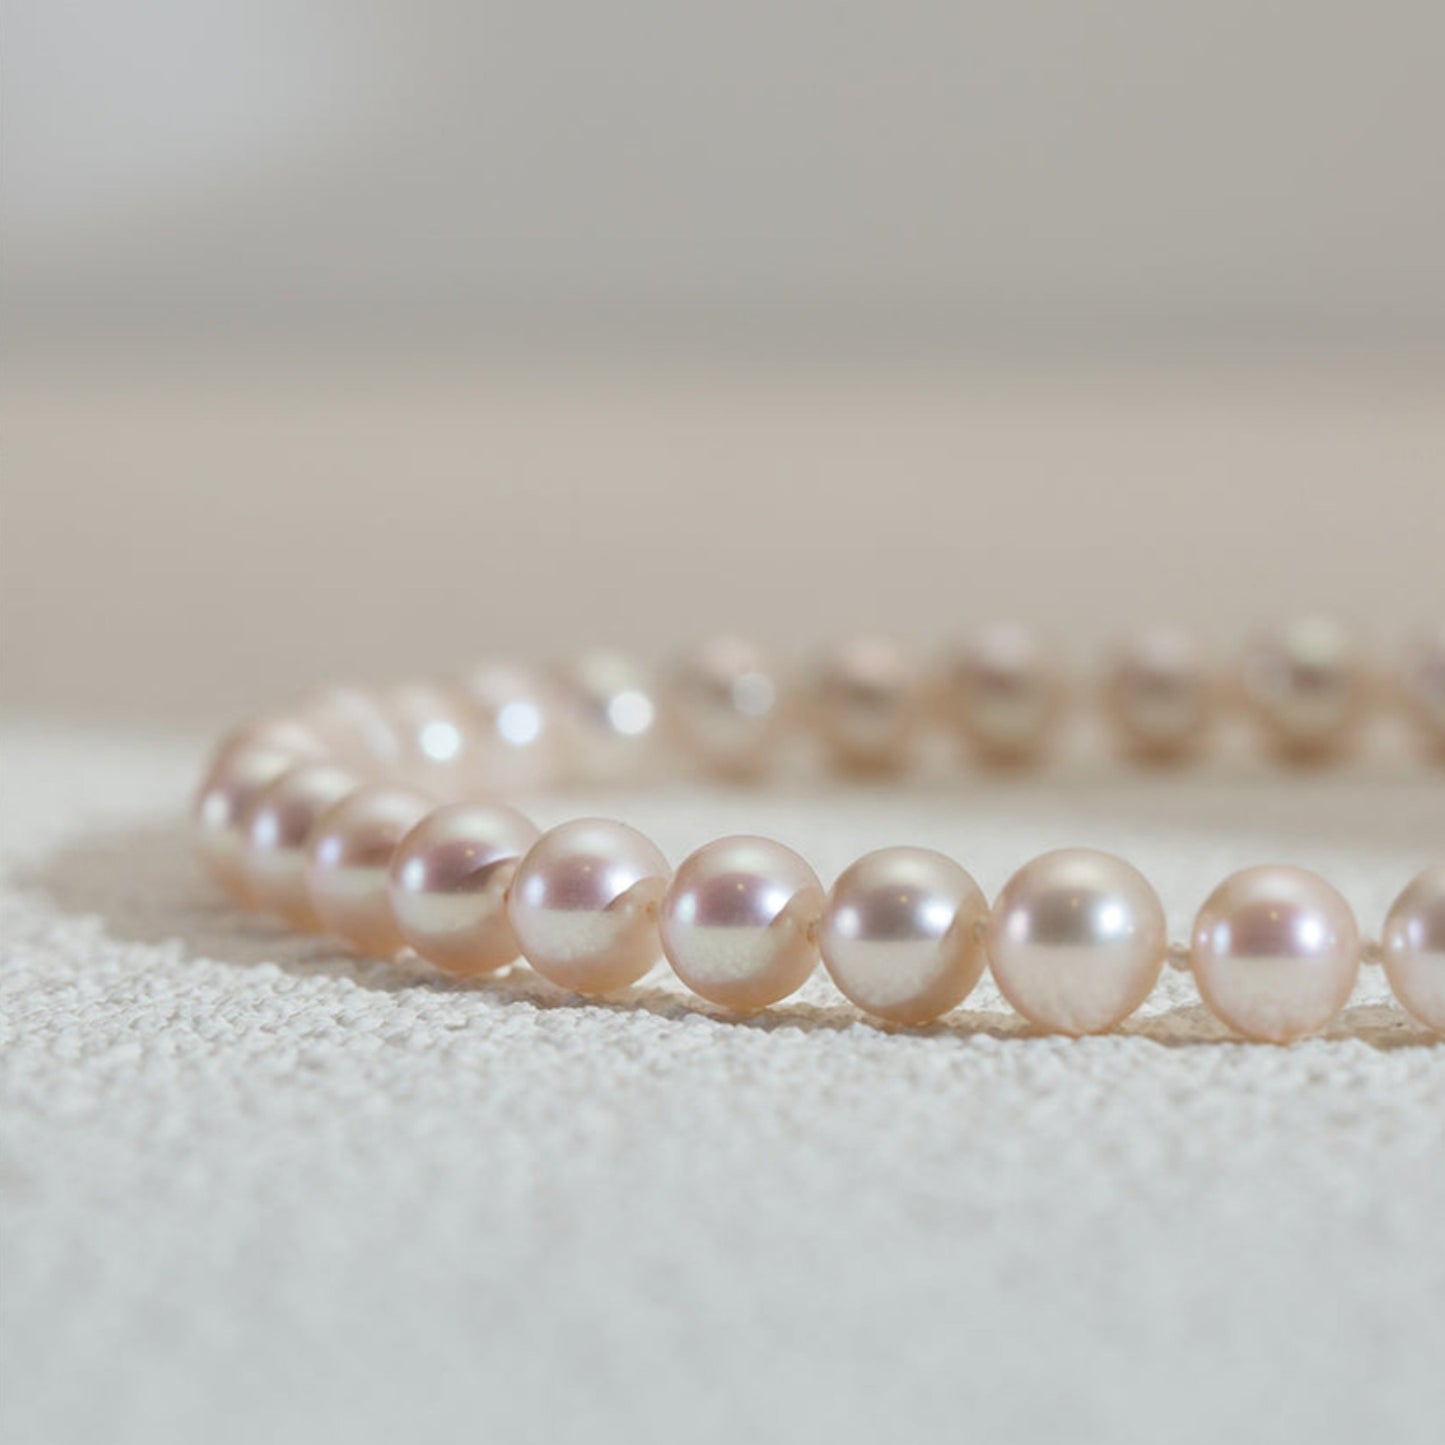 6.5-7.0mm White Freshwater Pearl Necklace, Perfect Round